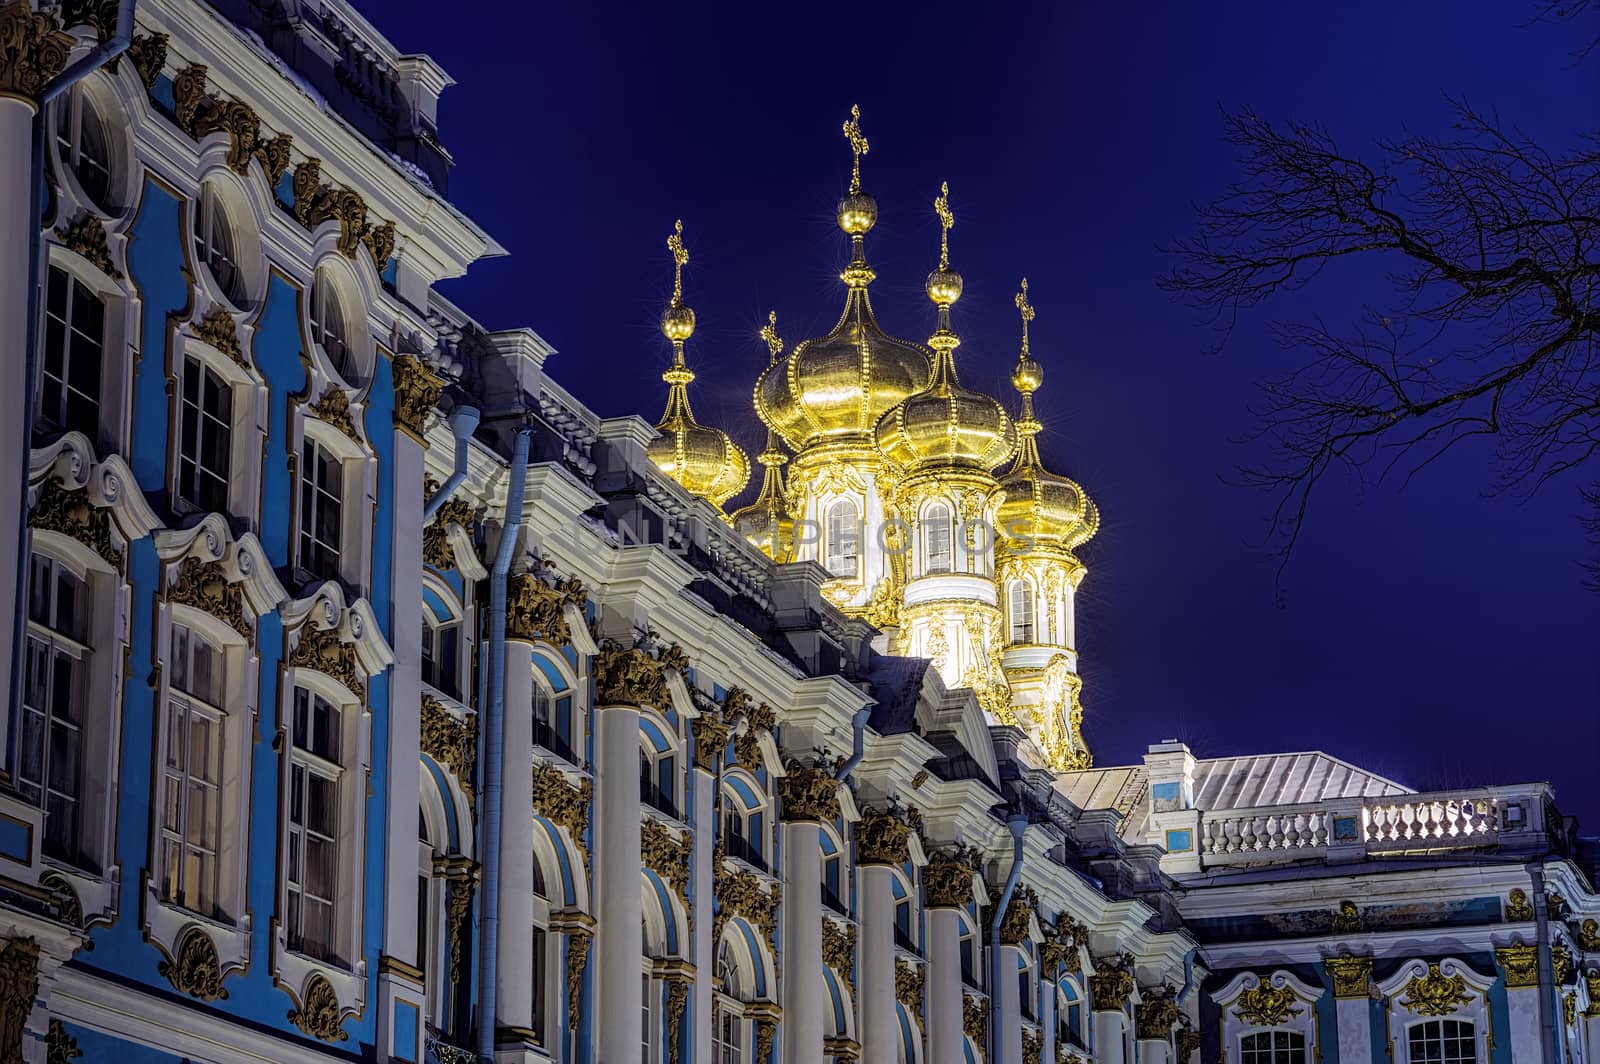 Catherine Palace in Pushkin night view with golden domes illuminated